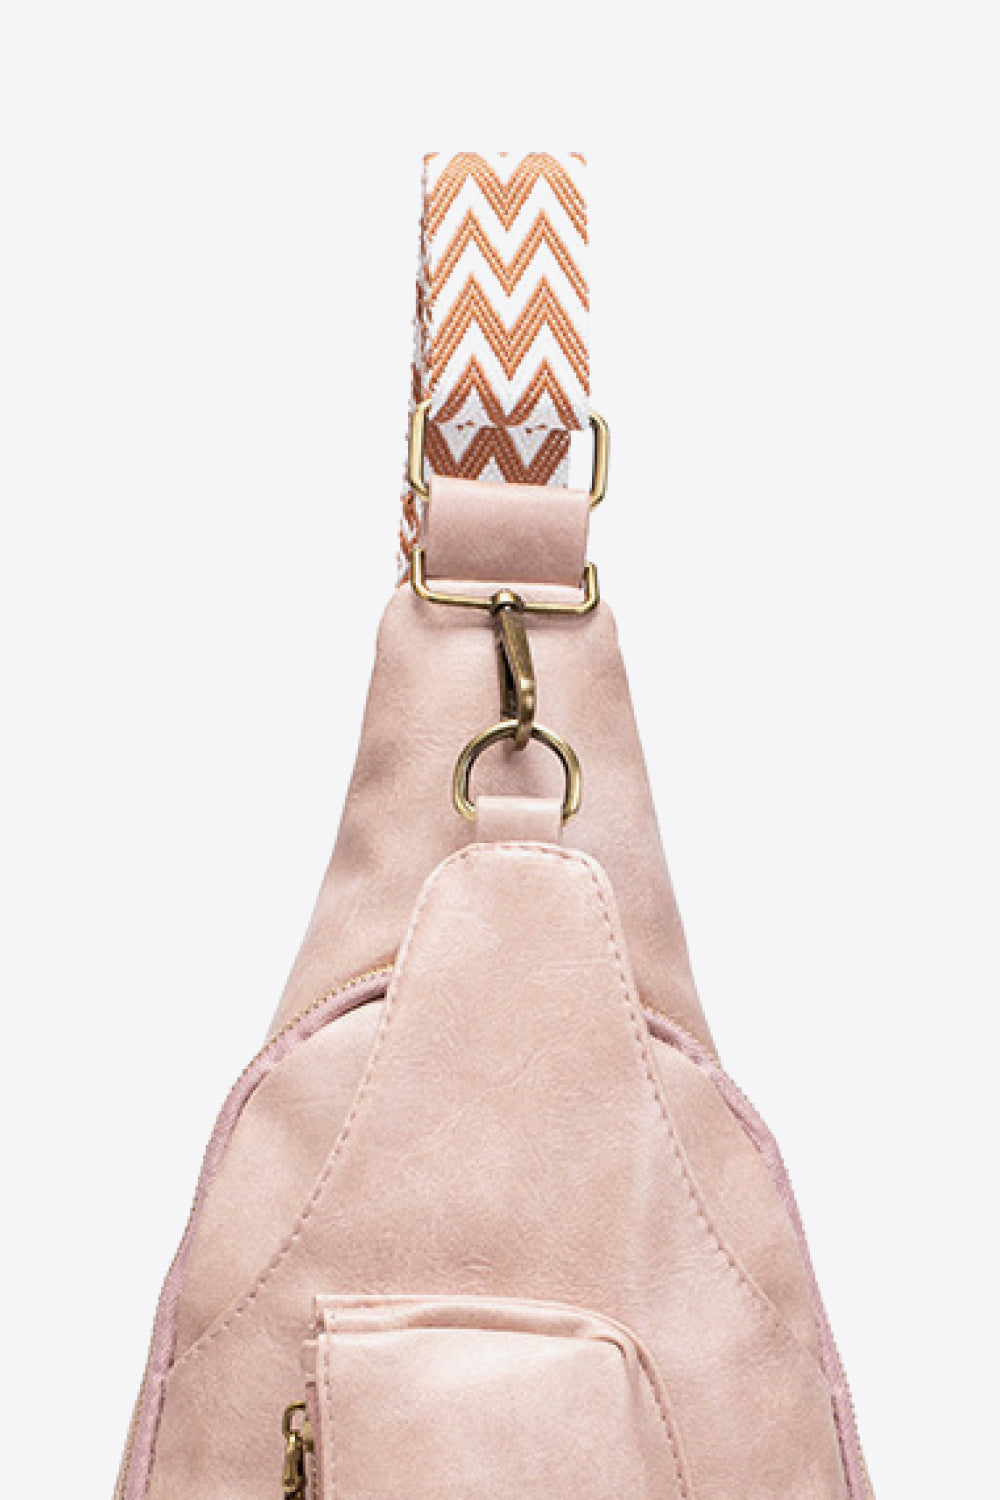 All The Feels Sling Bag - 8 Colors